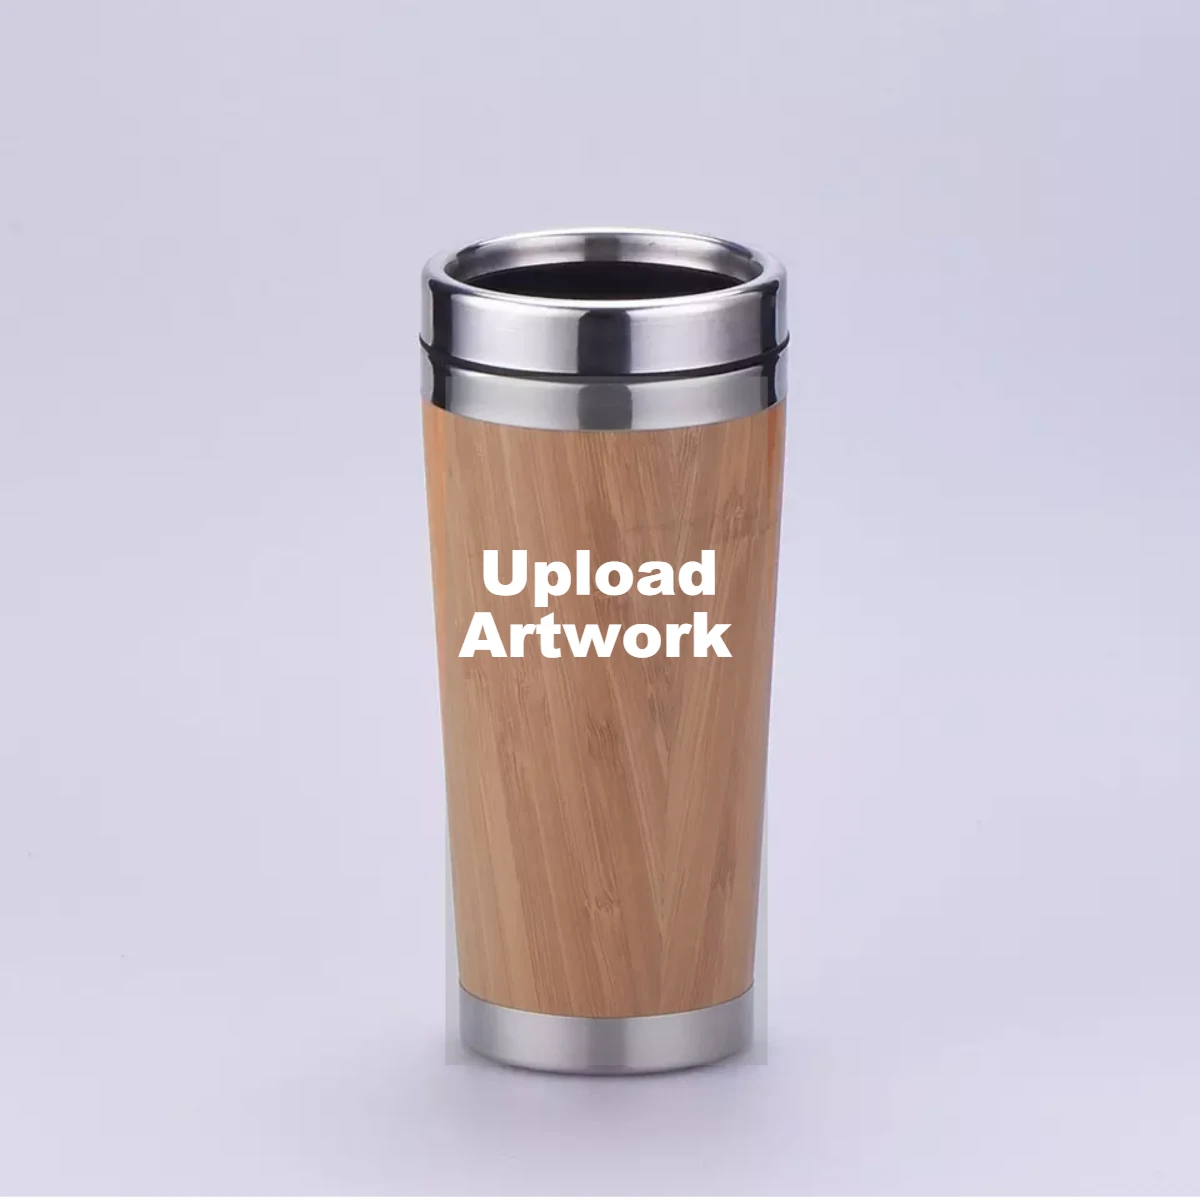 https://img2.tradewheel.com/uploads/images/products/4/8/wb-eco-friendly-product-double-wall-bamboo-fiber-coffee-tumbler-wholesale-coffee-drink-new-travel-mug-insulated-bamboo-tumbler1-0366164001620629408.png.webp